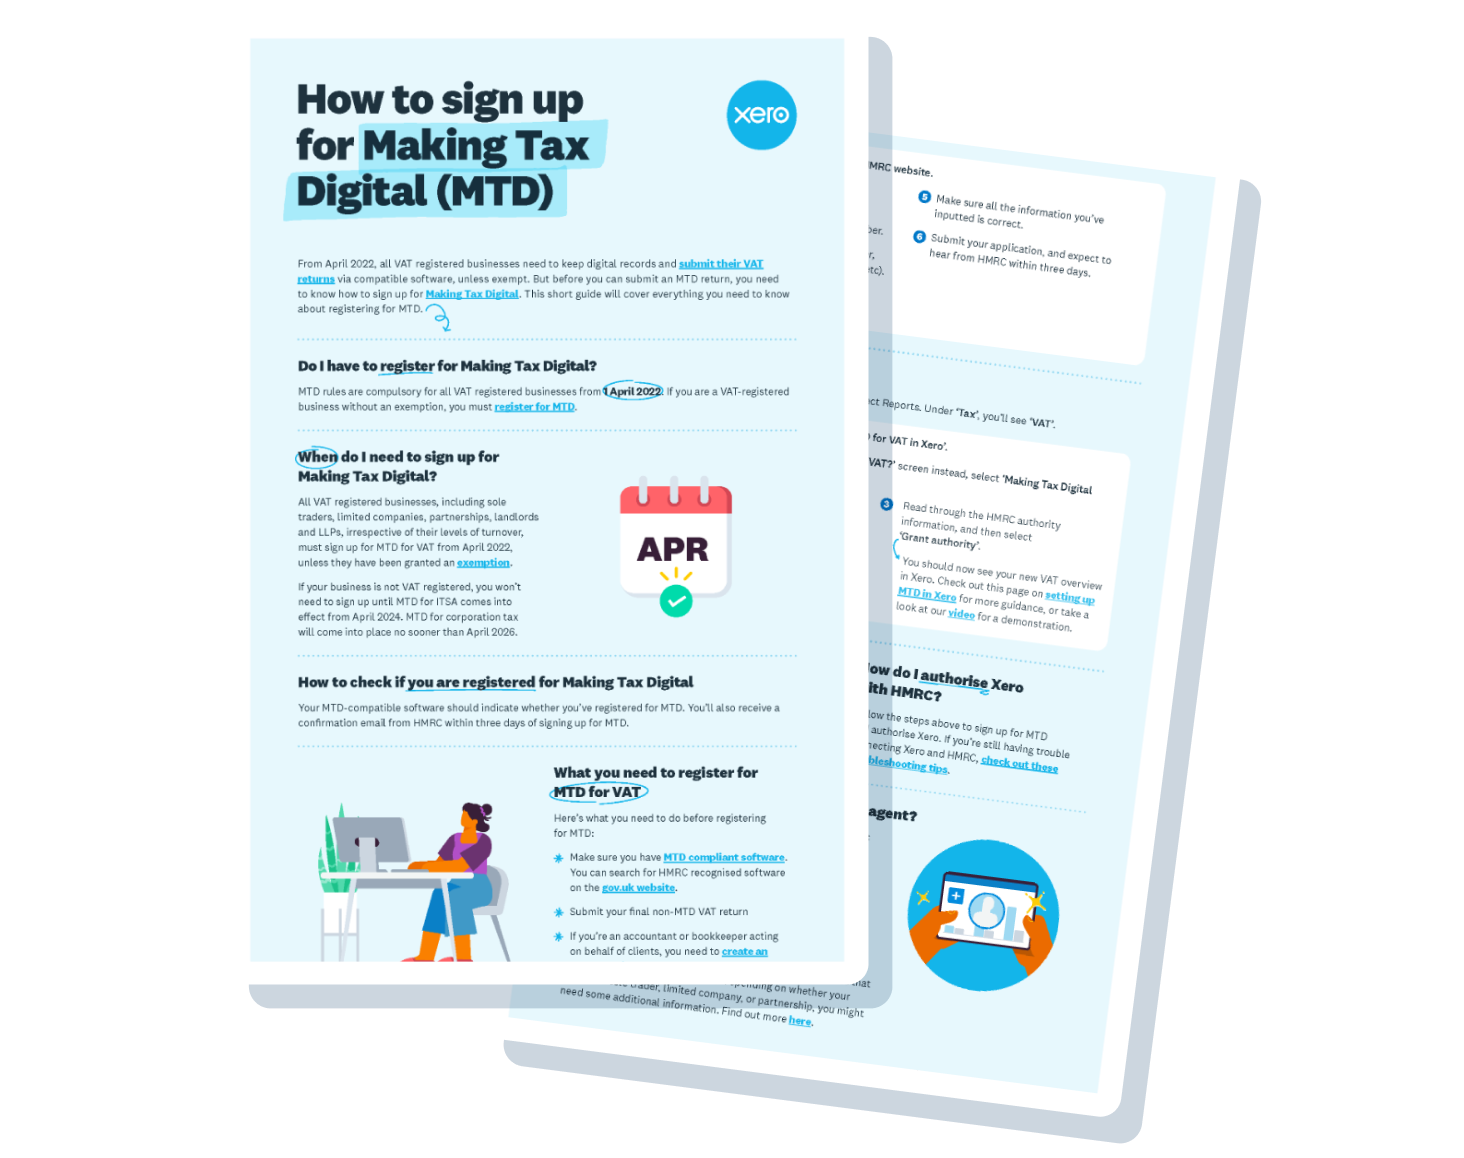 How to sign up to Making Tax Digital